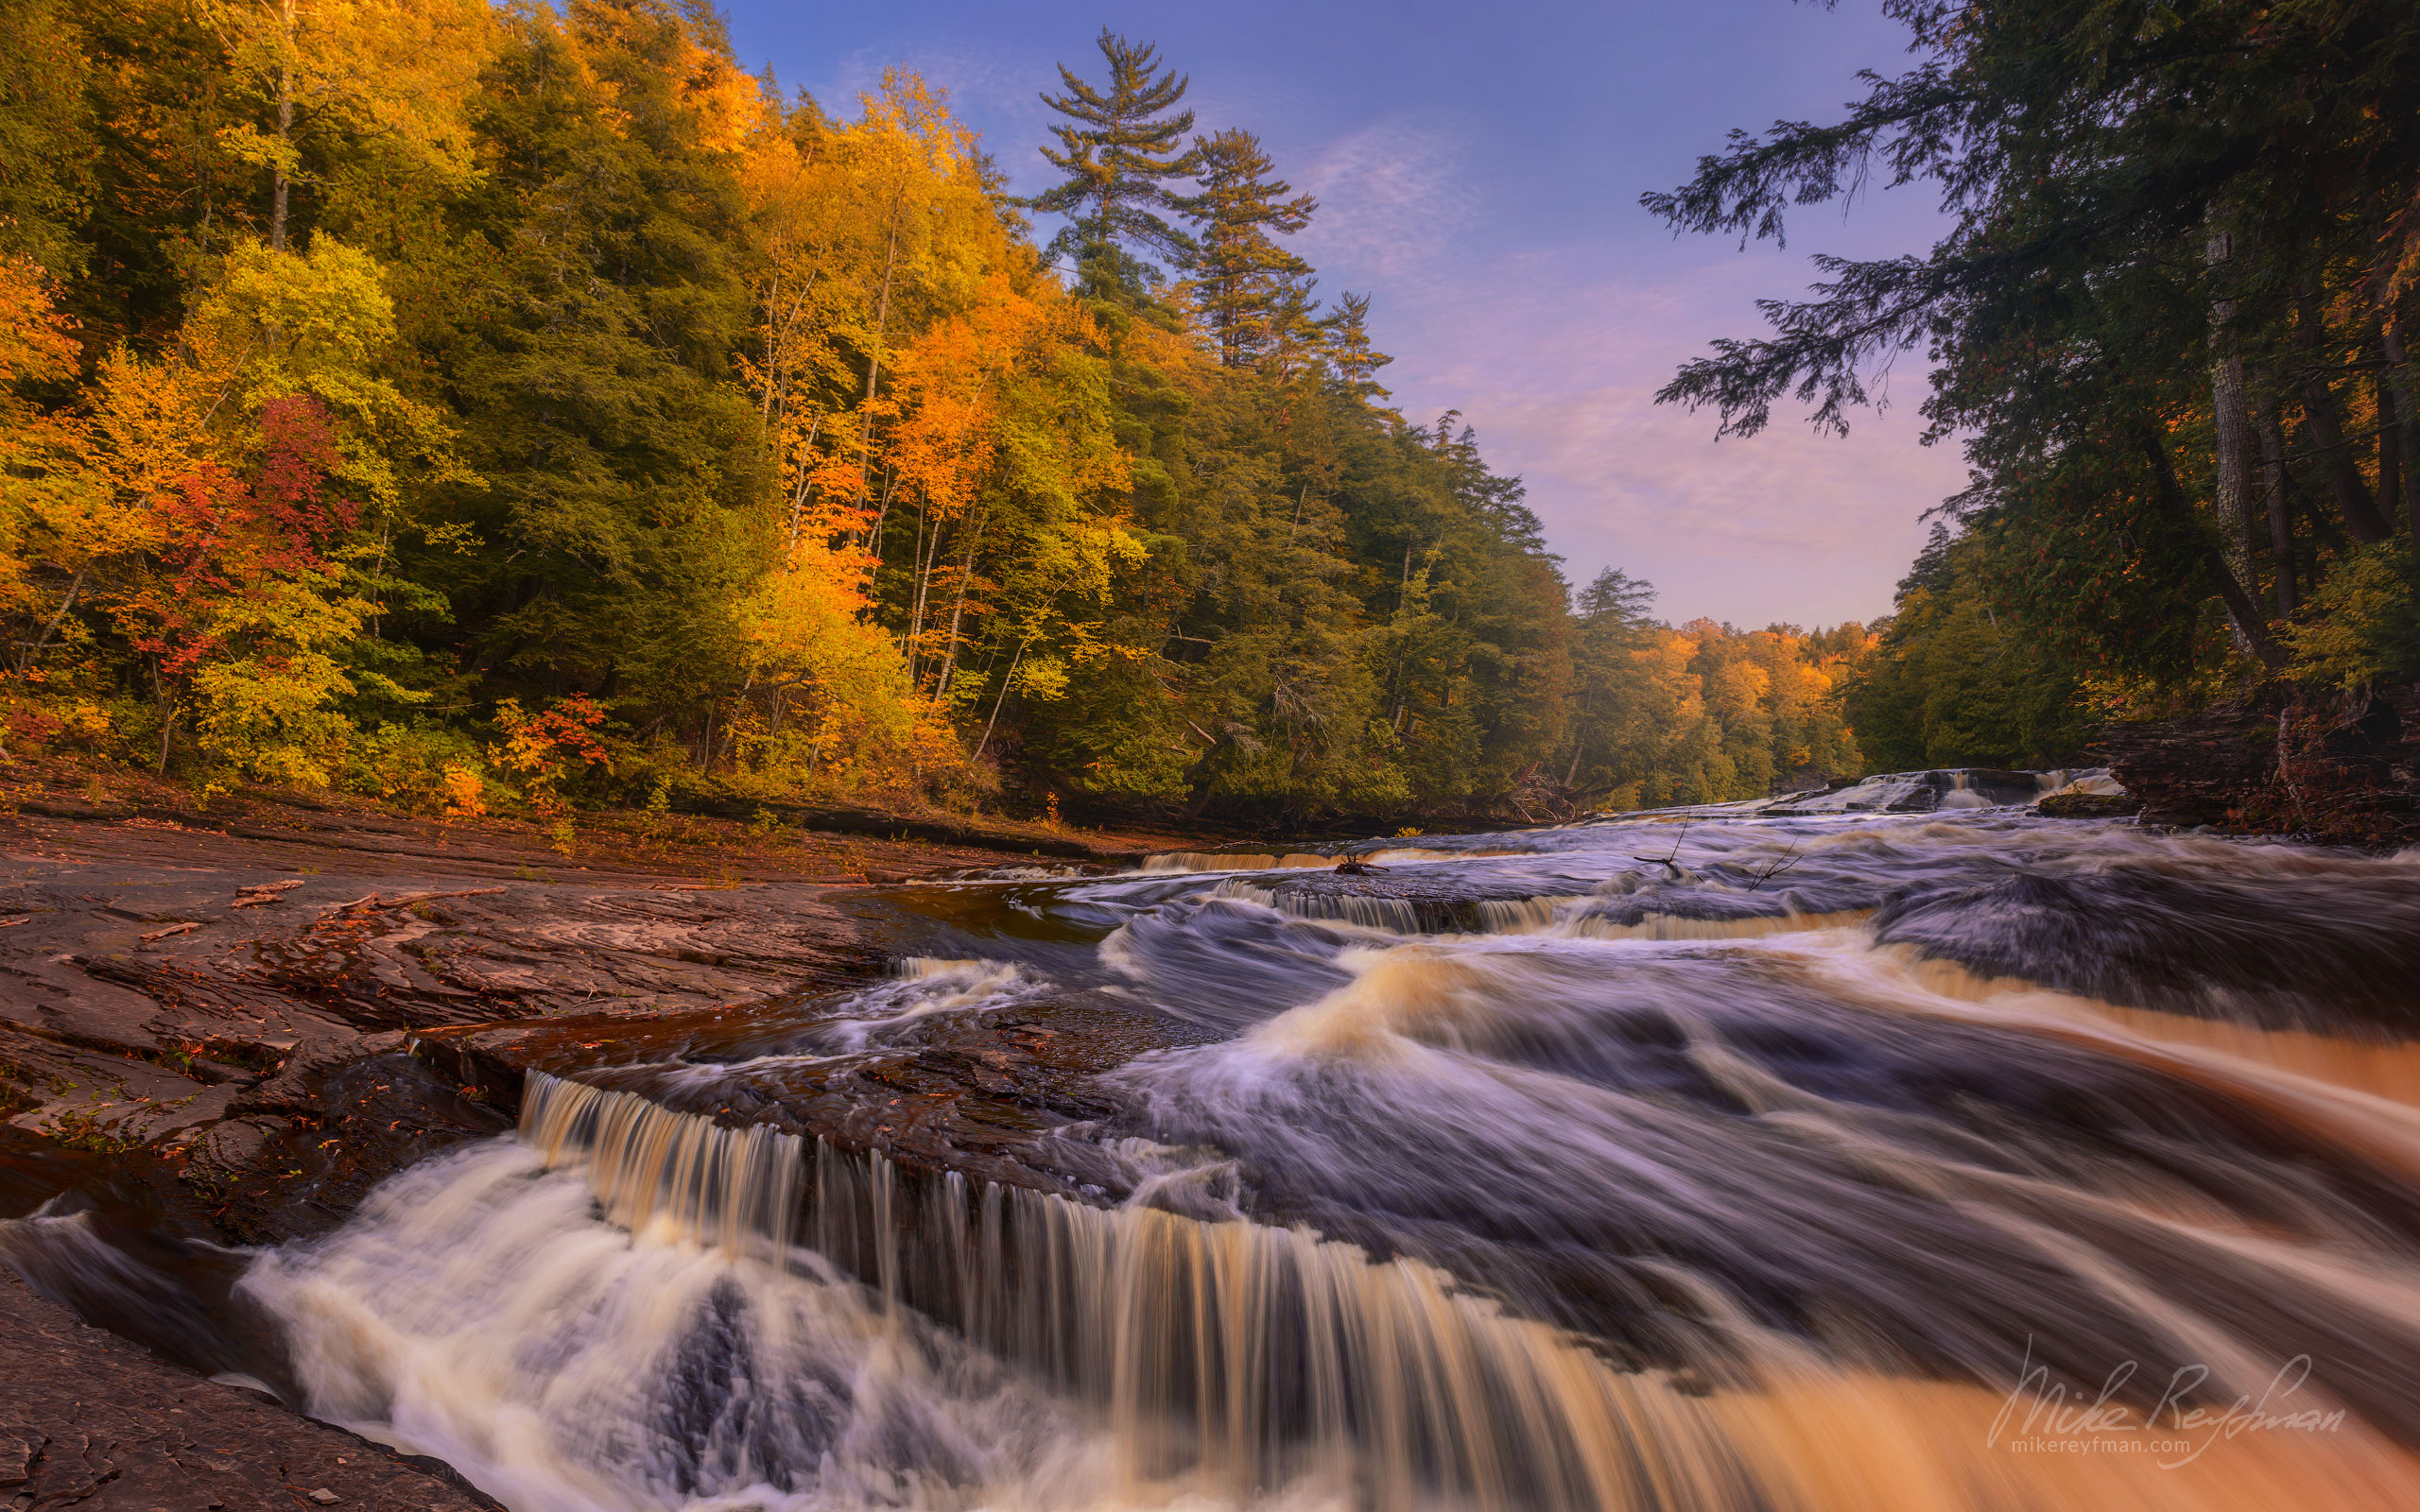 Presque Isle River, Porcupine Mountains, Upper Peninsula, Michigan, USA. UP-MI_030_ZRA7549.jpg - Michigan's Upper Peninsula - the best destination in US for fall colors. - Mike Reyfman Photography